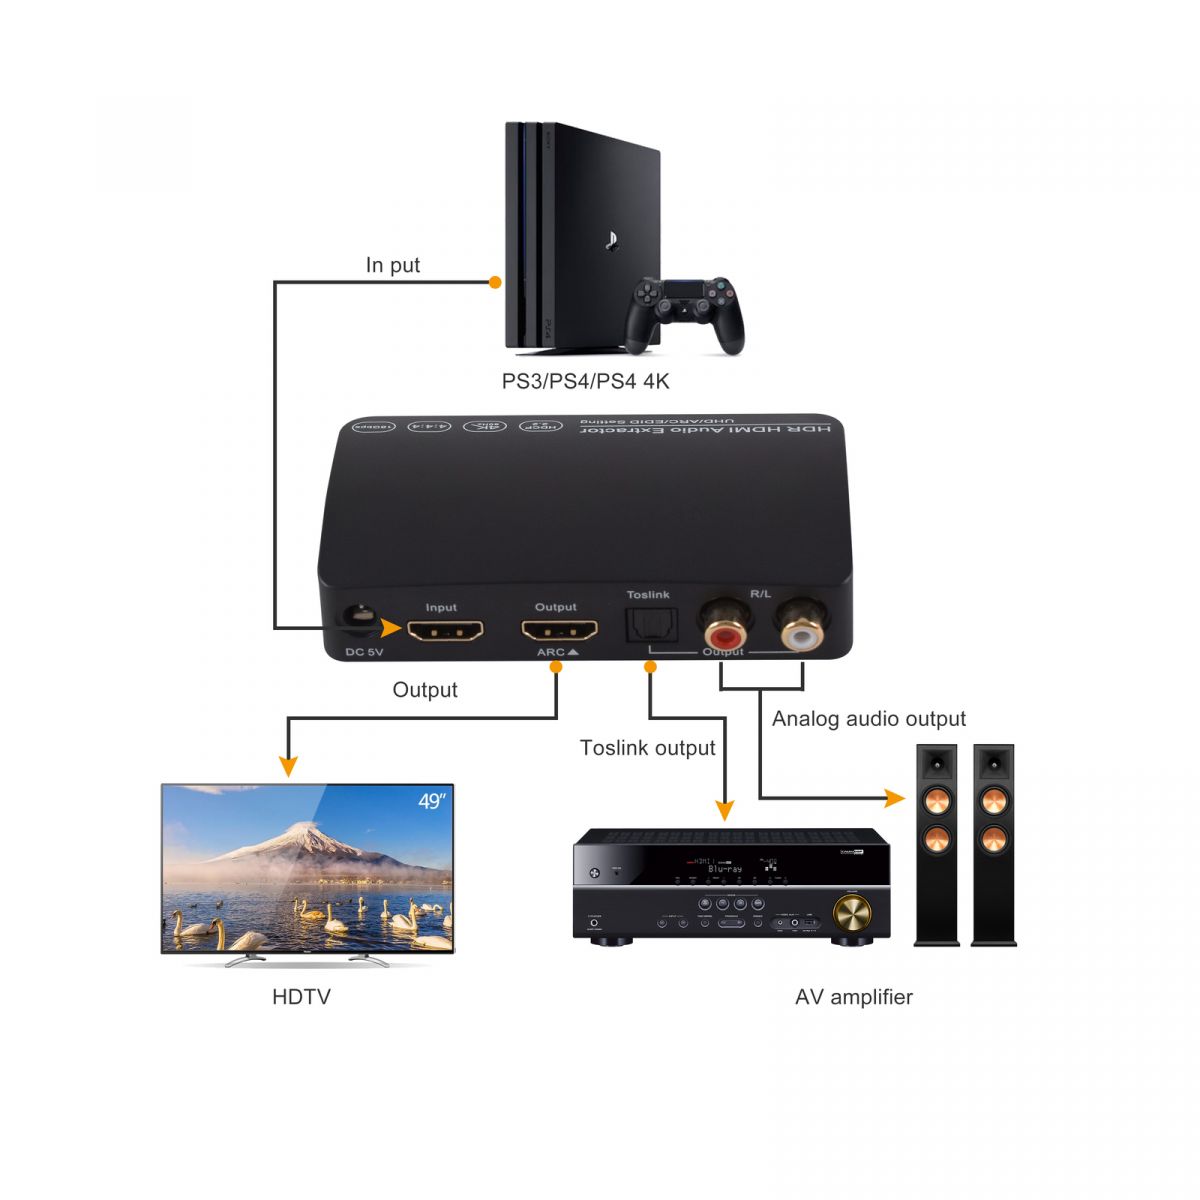 to connect HDMI to without HDMI?